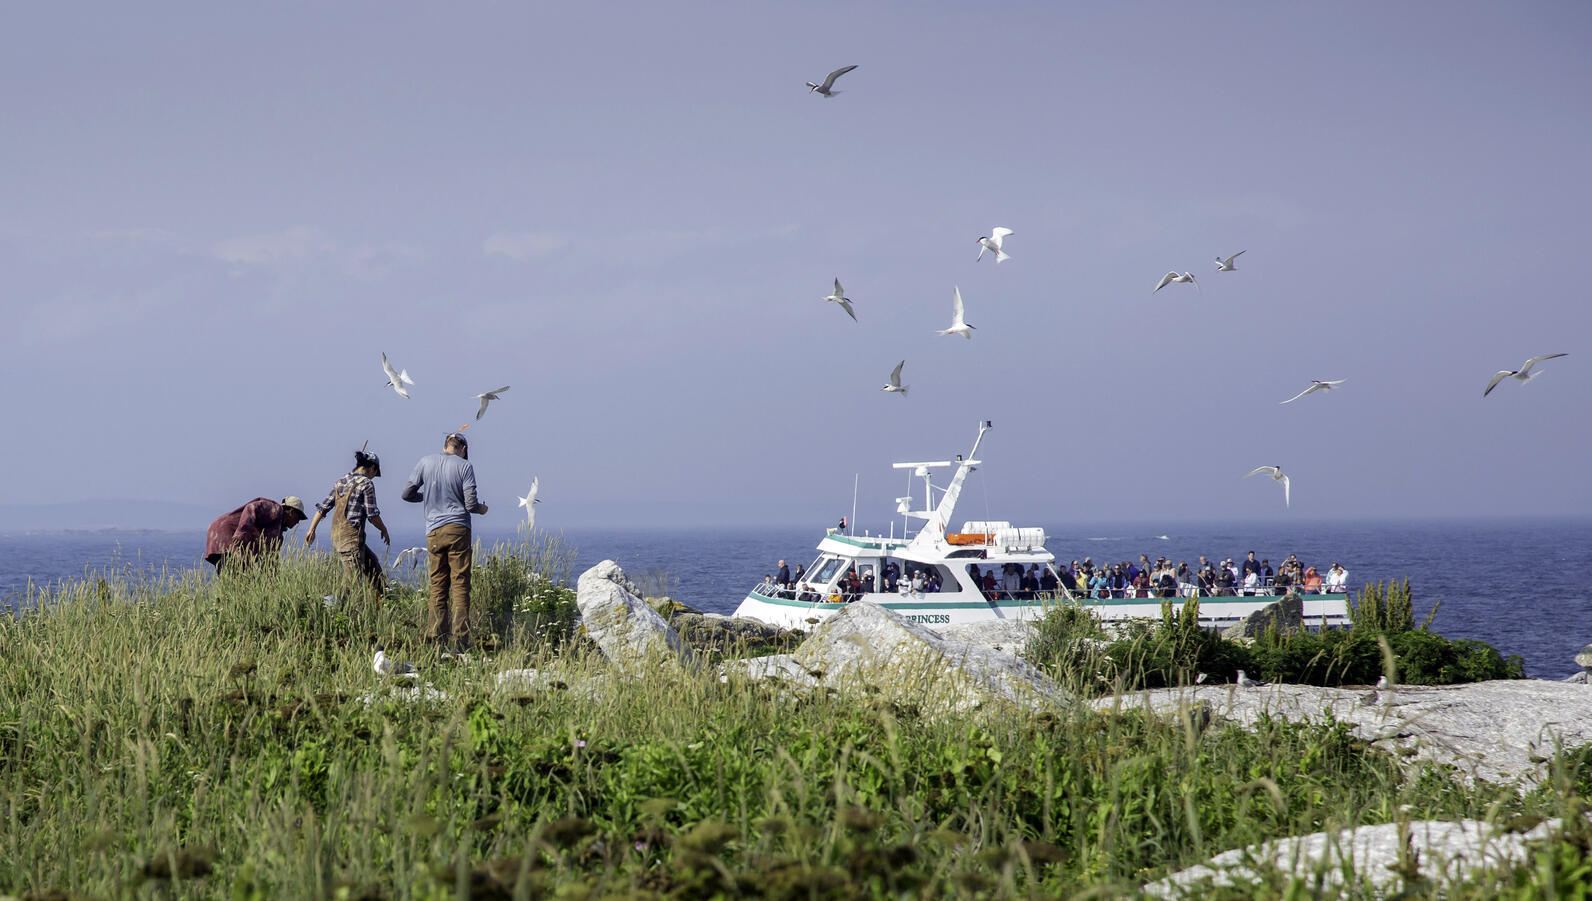 Terns circle overhead, and visitors observe from aboard as Eastern Egg Rock scientists complete surveys on the island.